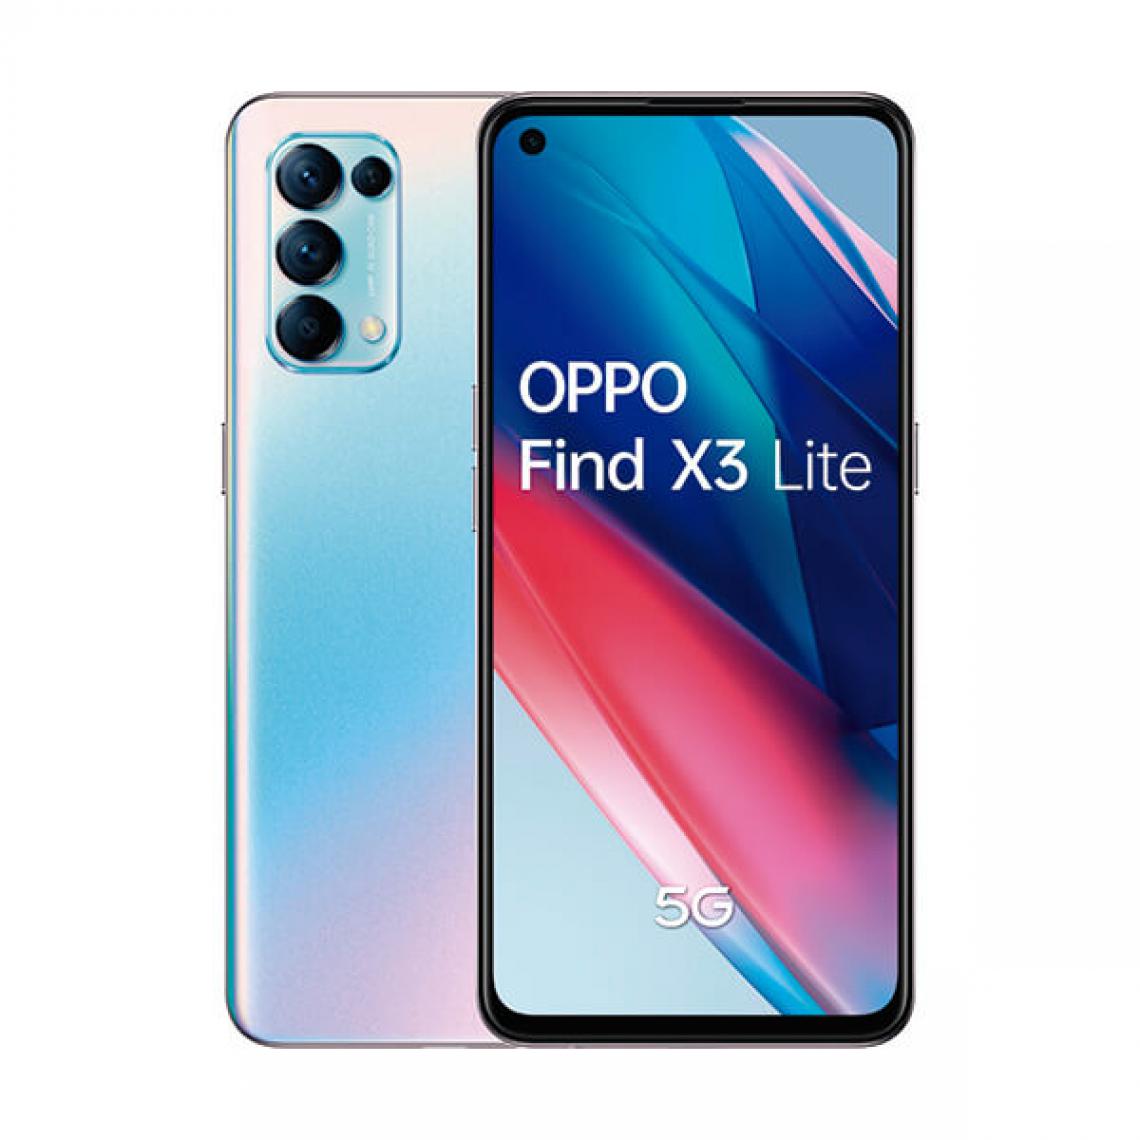 Oppo - Oppo Find X3 Lite 5G 8Go/128Go Argent (Galactic Silver) Dual SIM - Smartphone Android